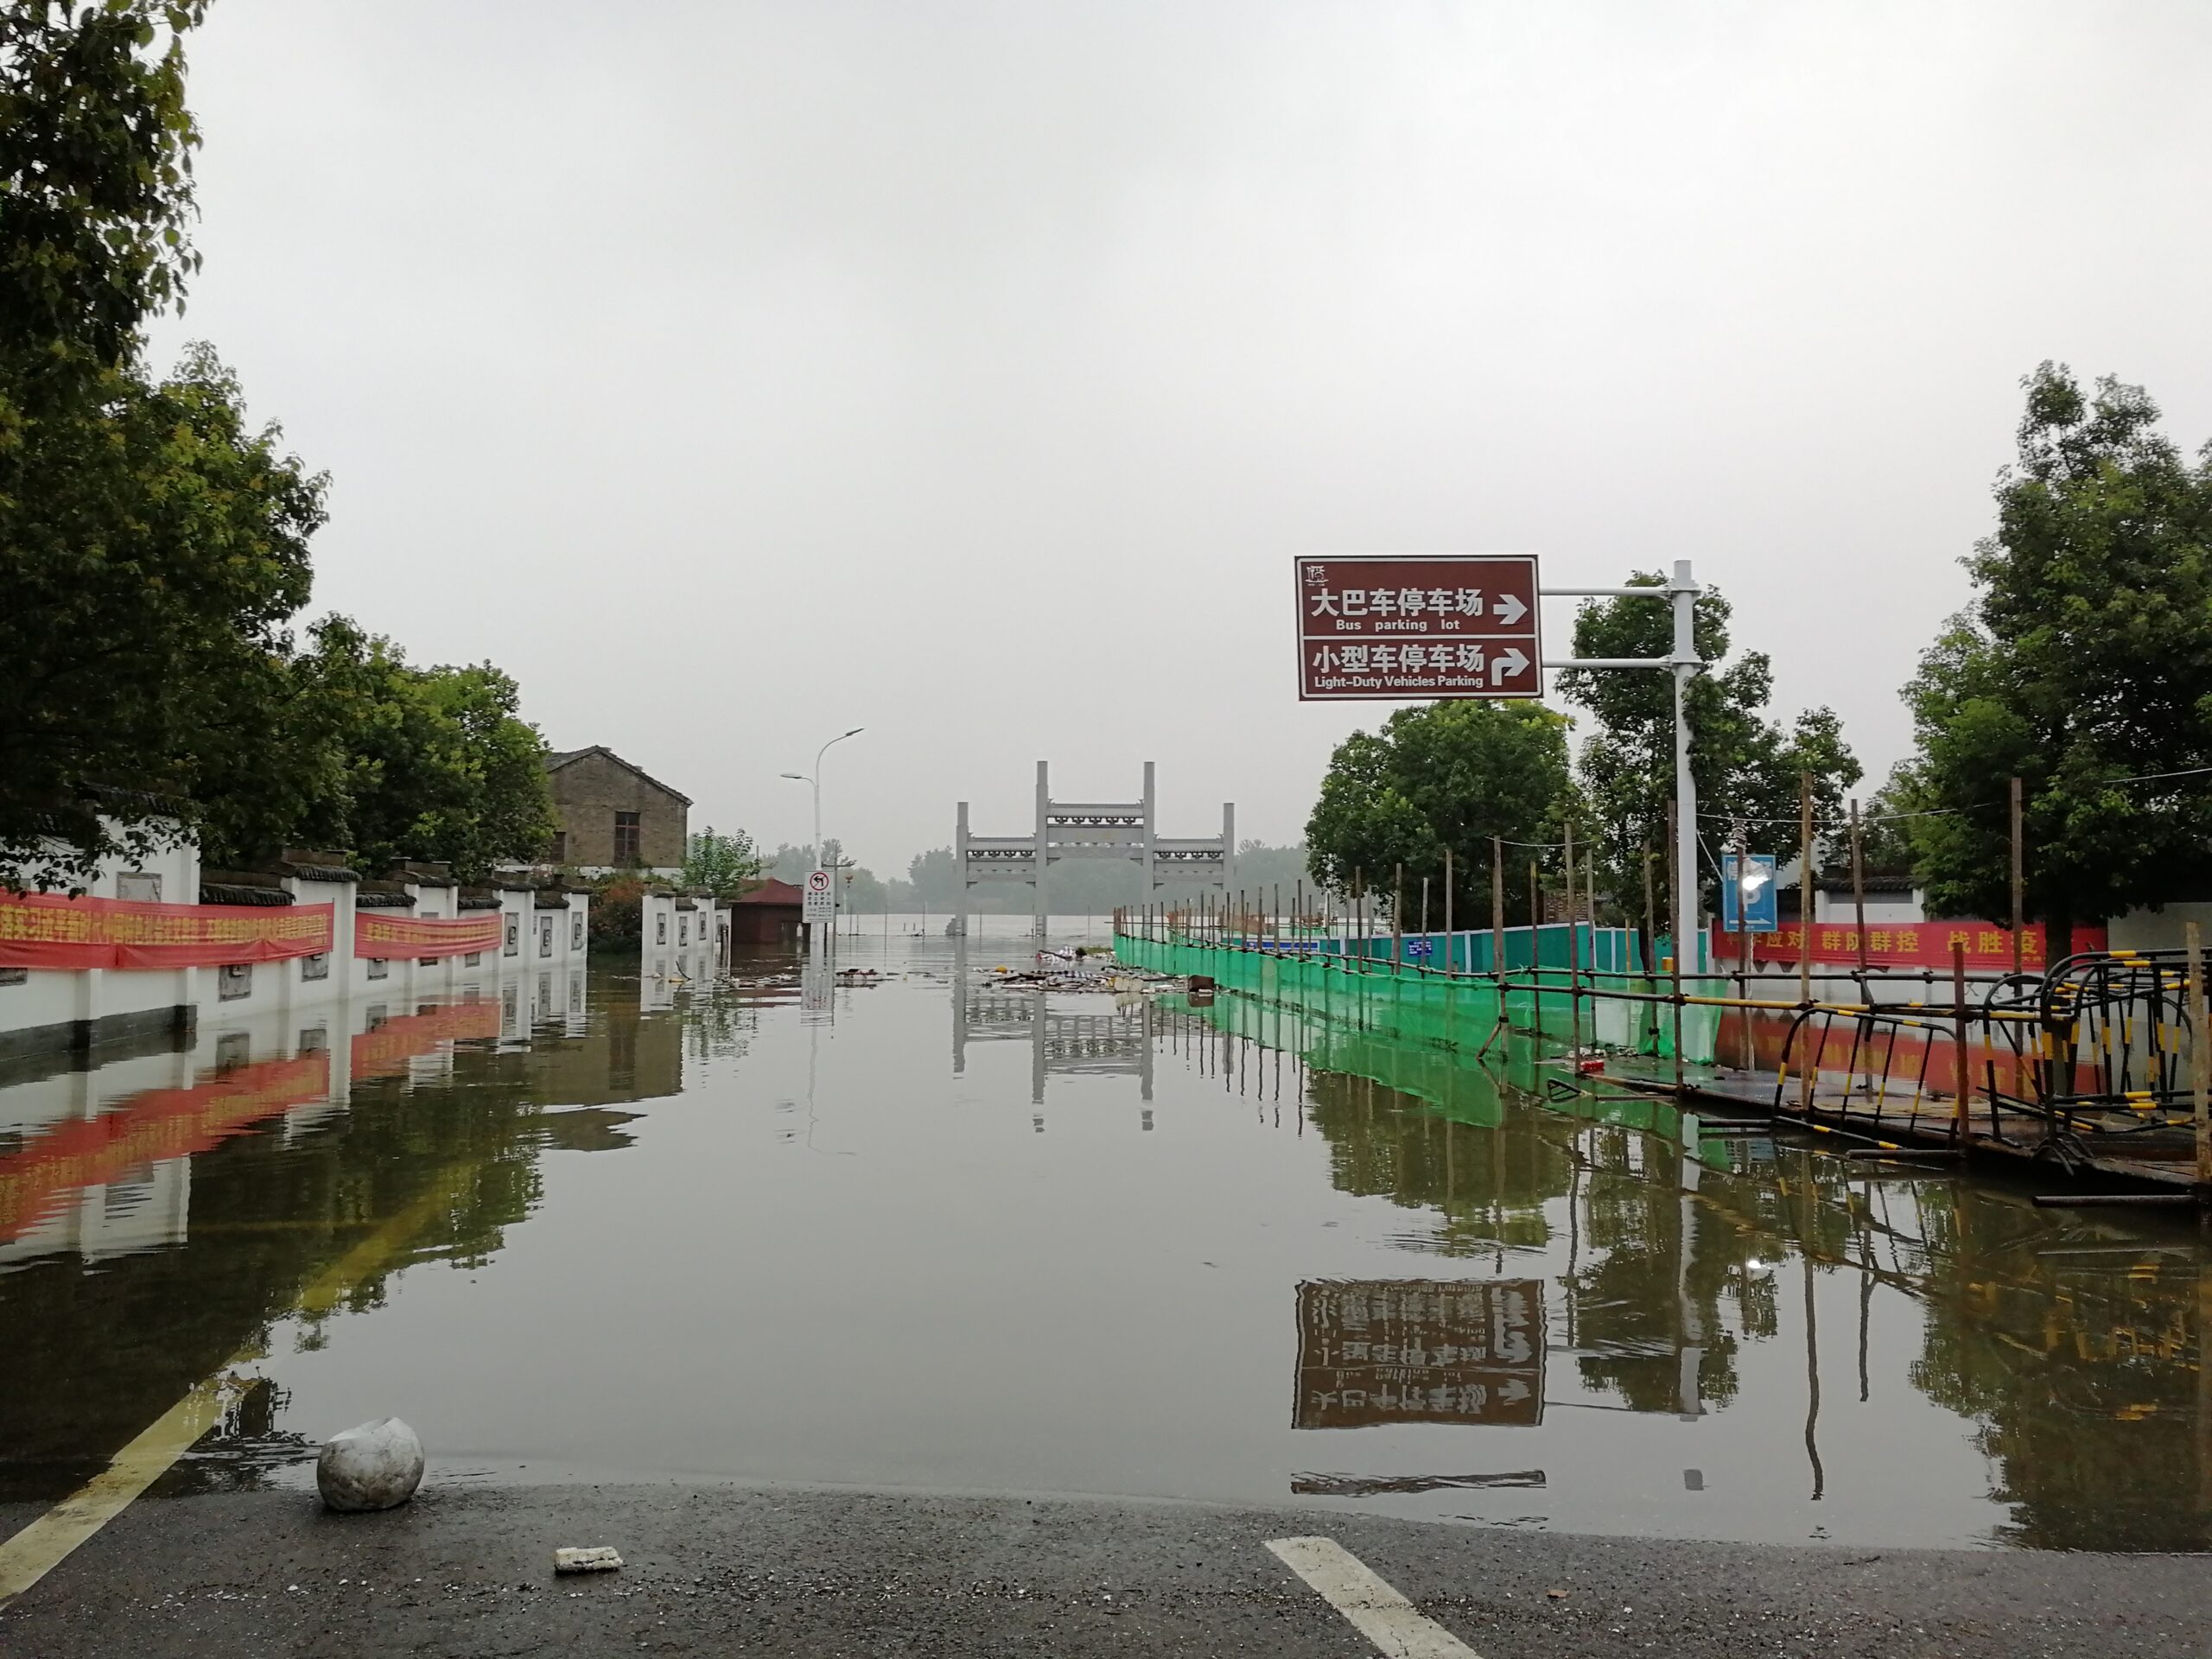 Flooded Datong Town, Tongling by Whisper of the heart